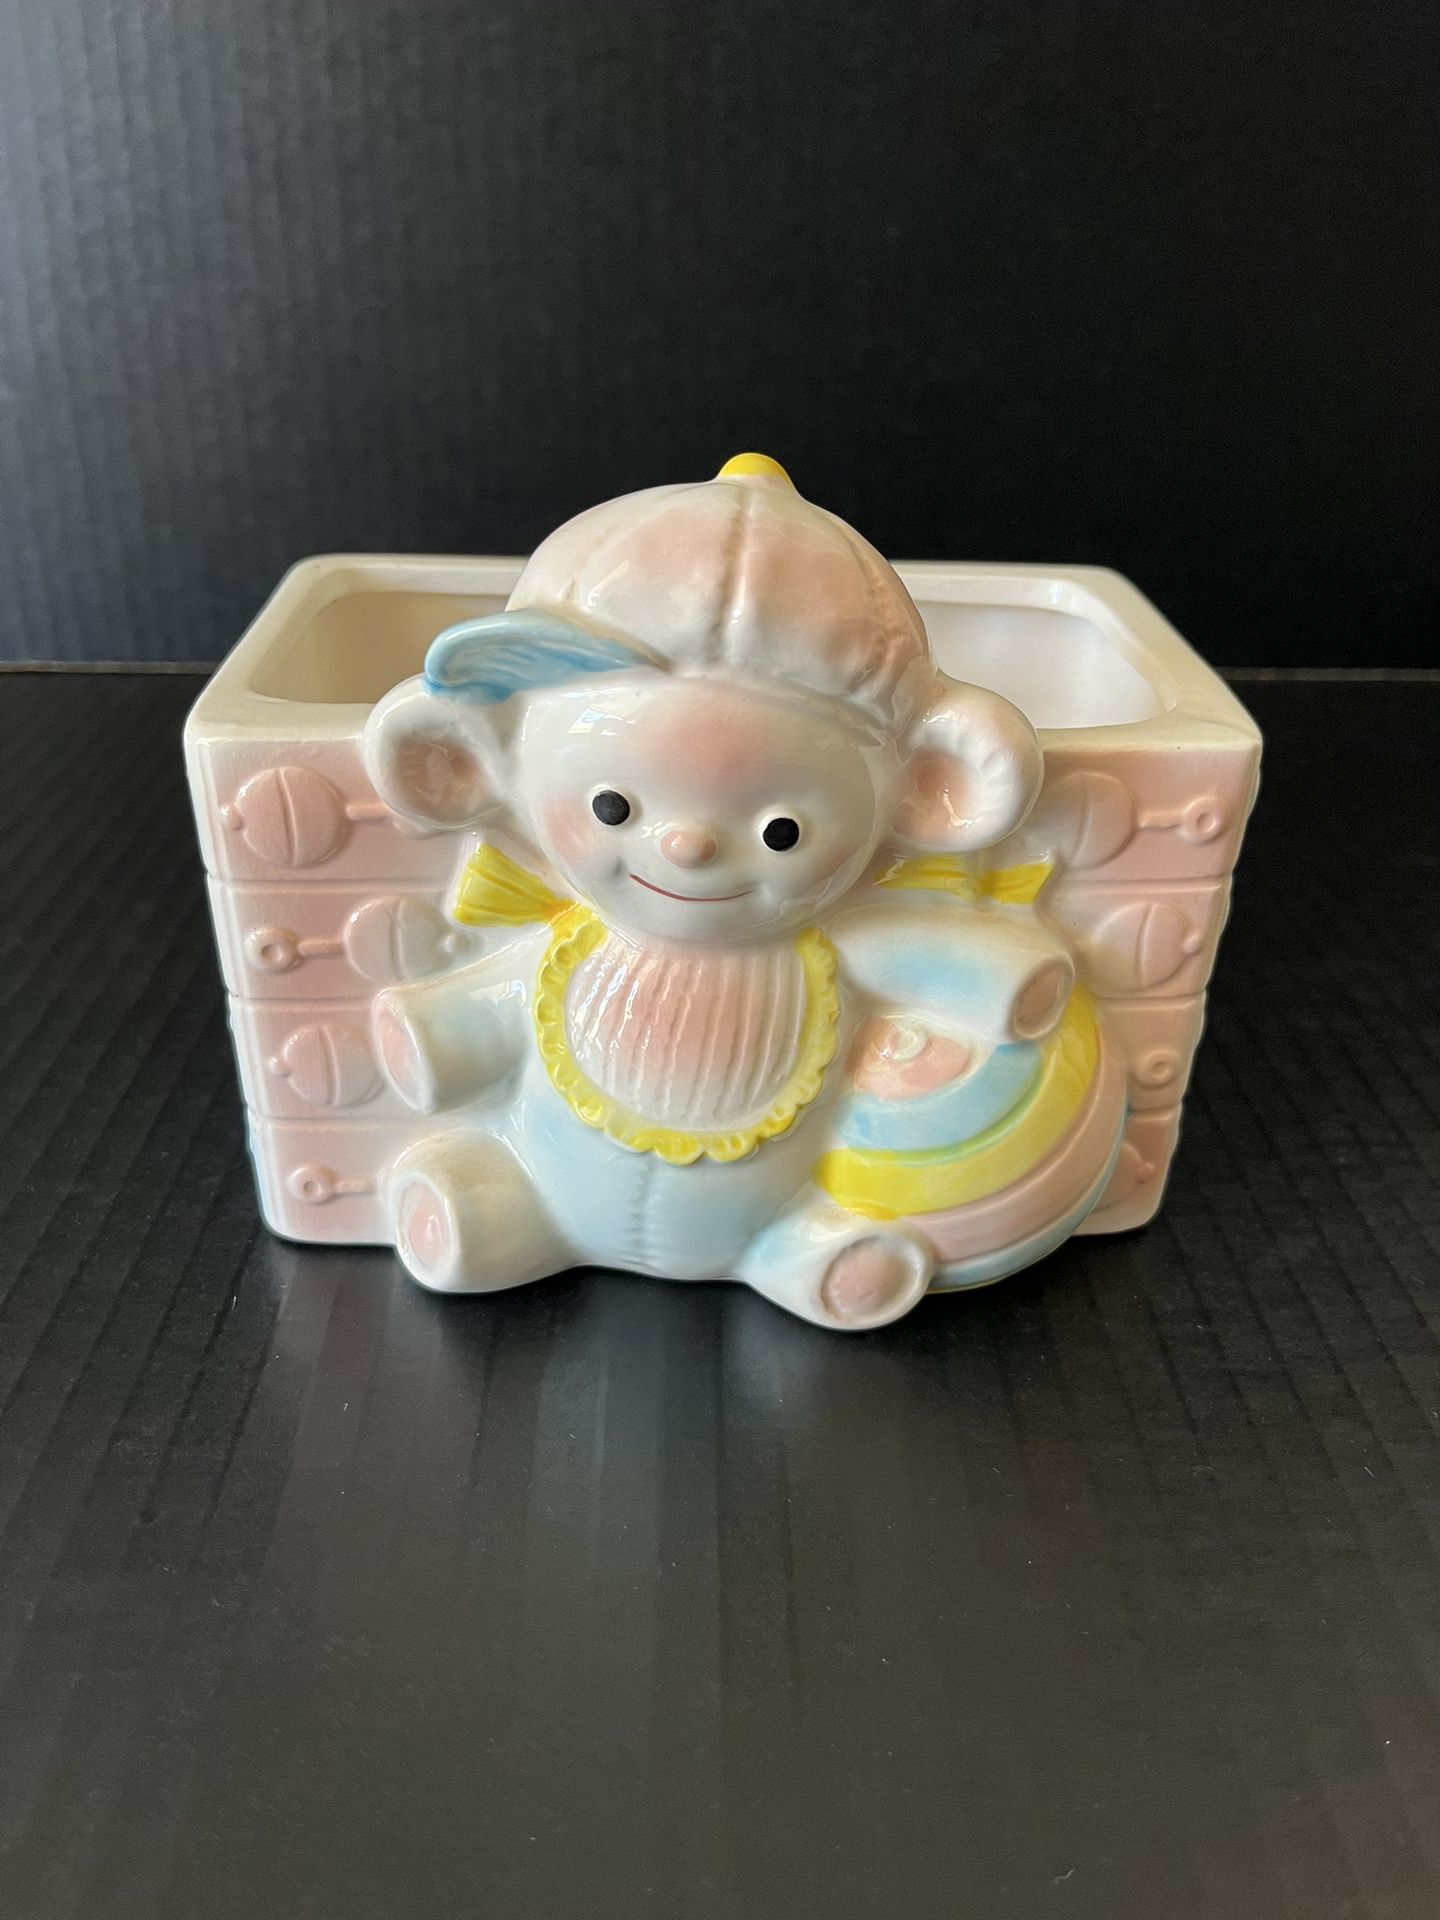 Vintage 1983 Relpo Label Numbered Baby Boy Bear Toy Box Planter